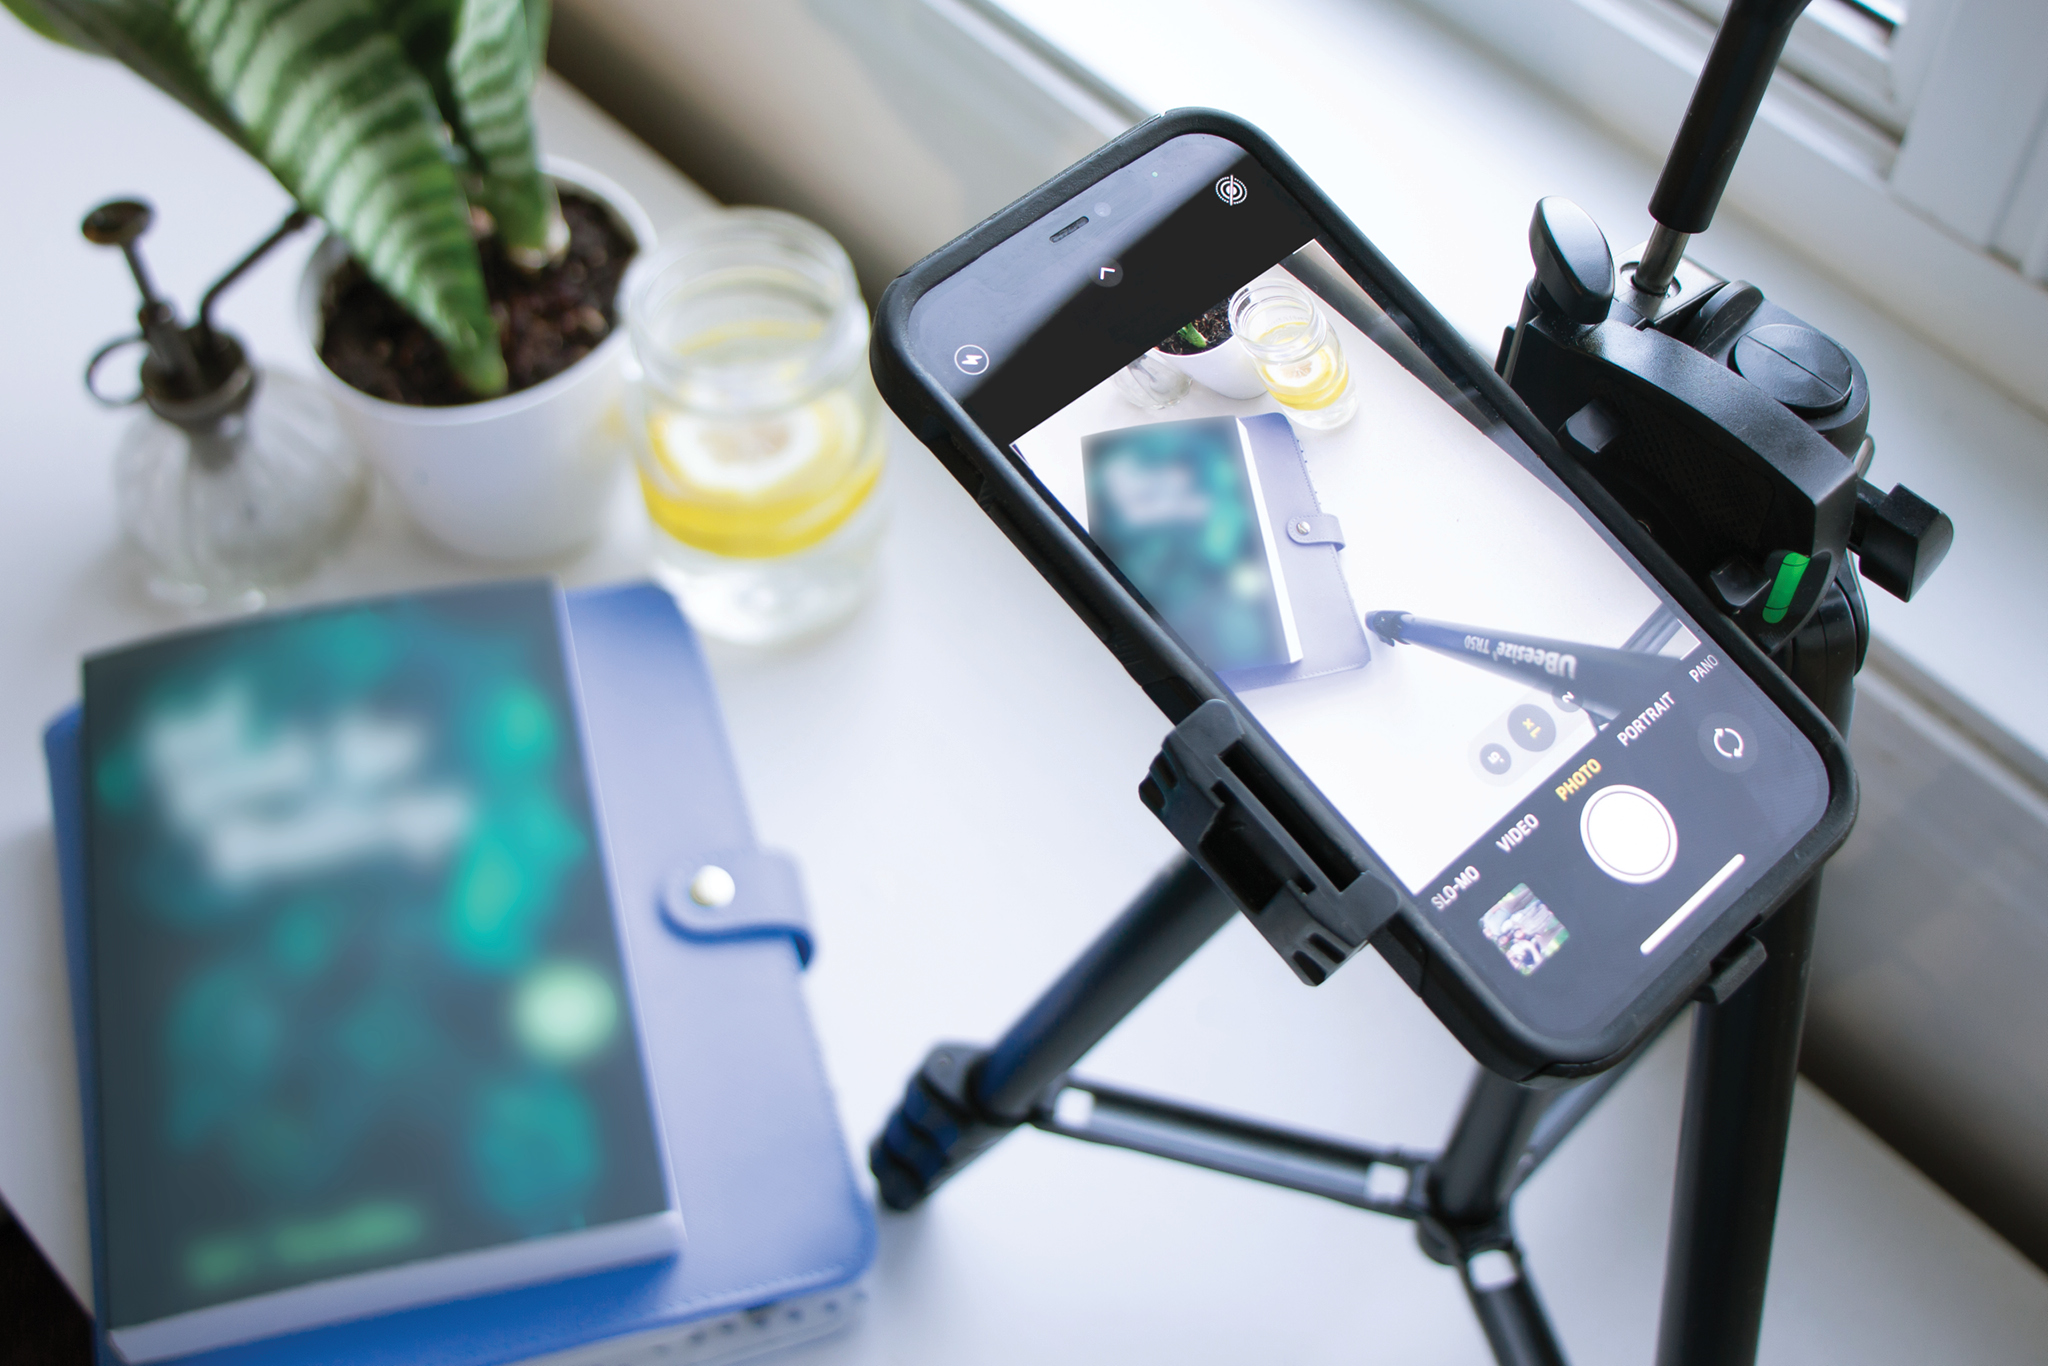 A tripod with a phone attached is shown taking a photo of a dark green book flatlay from above.